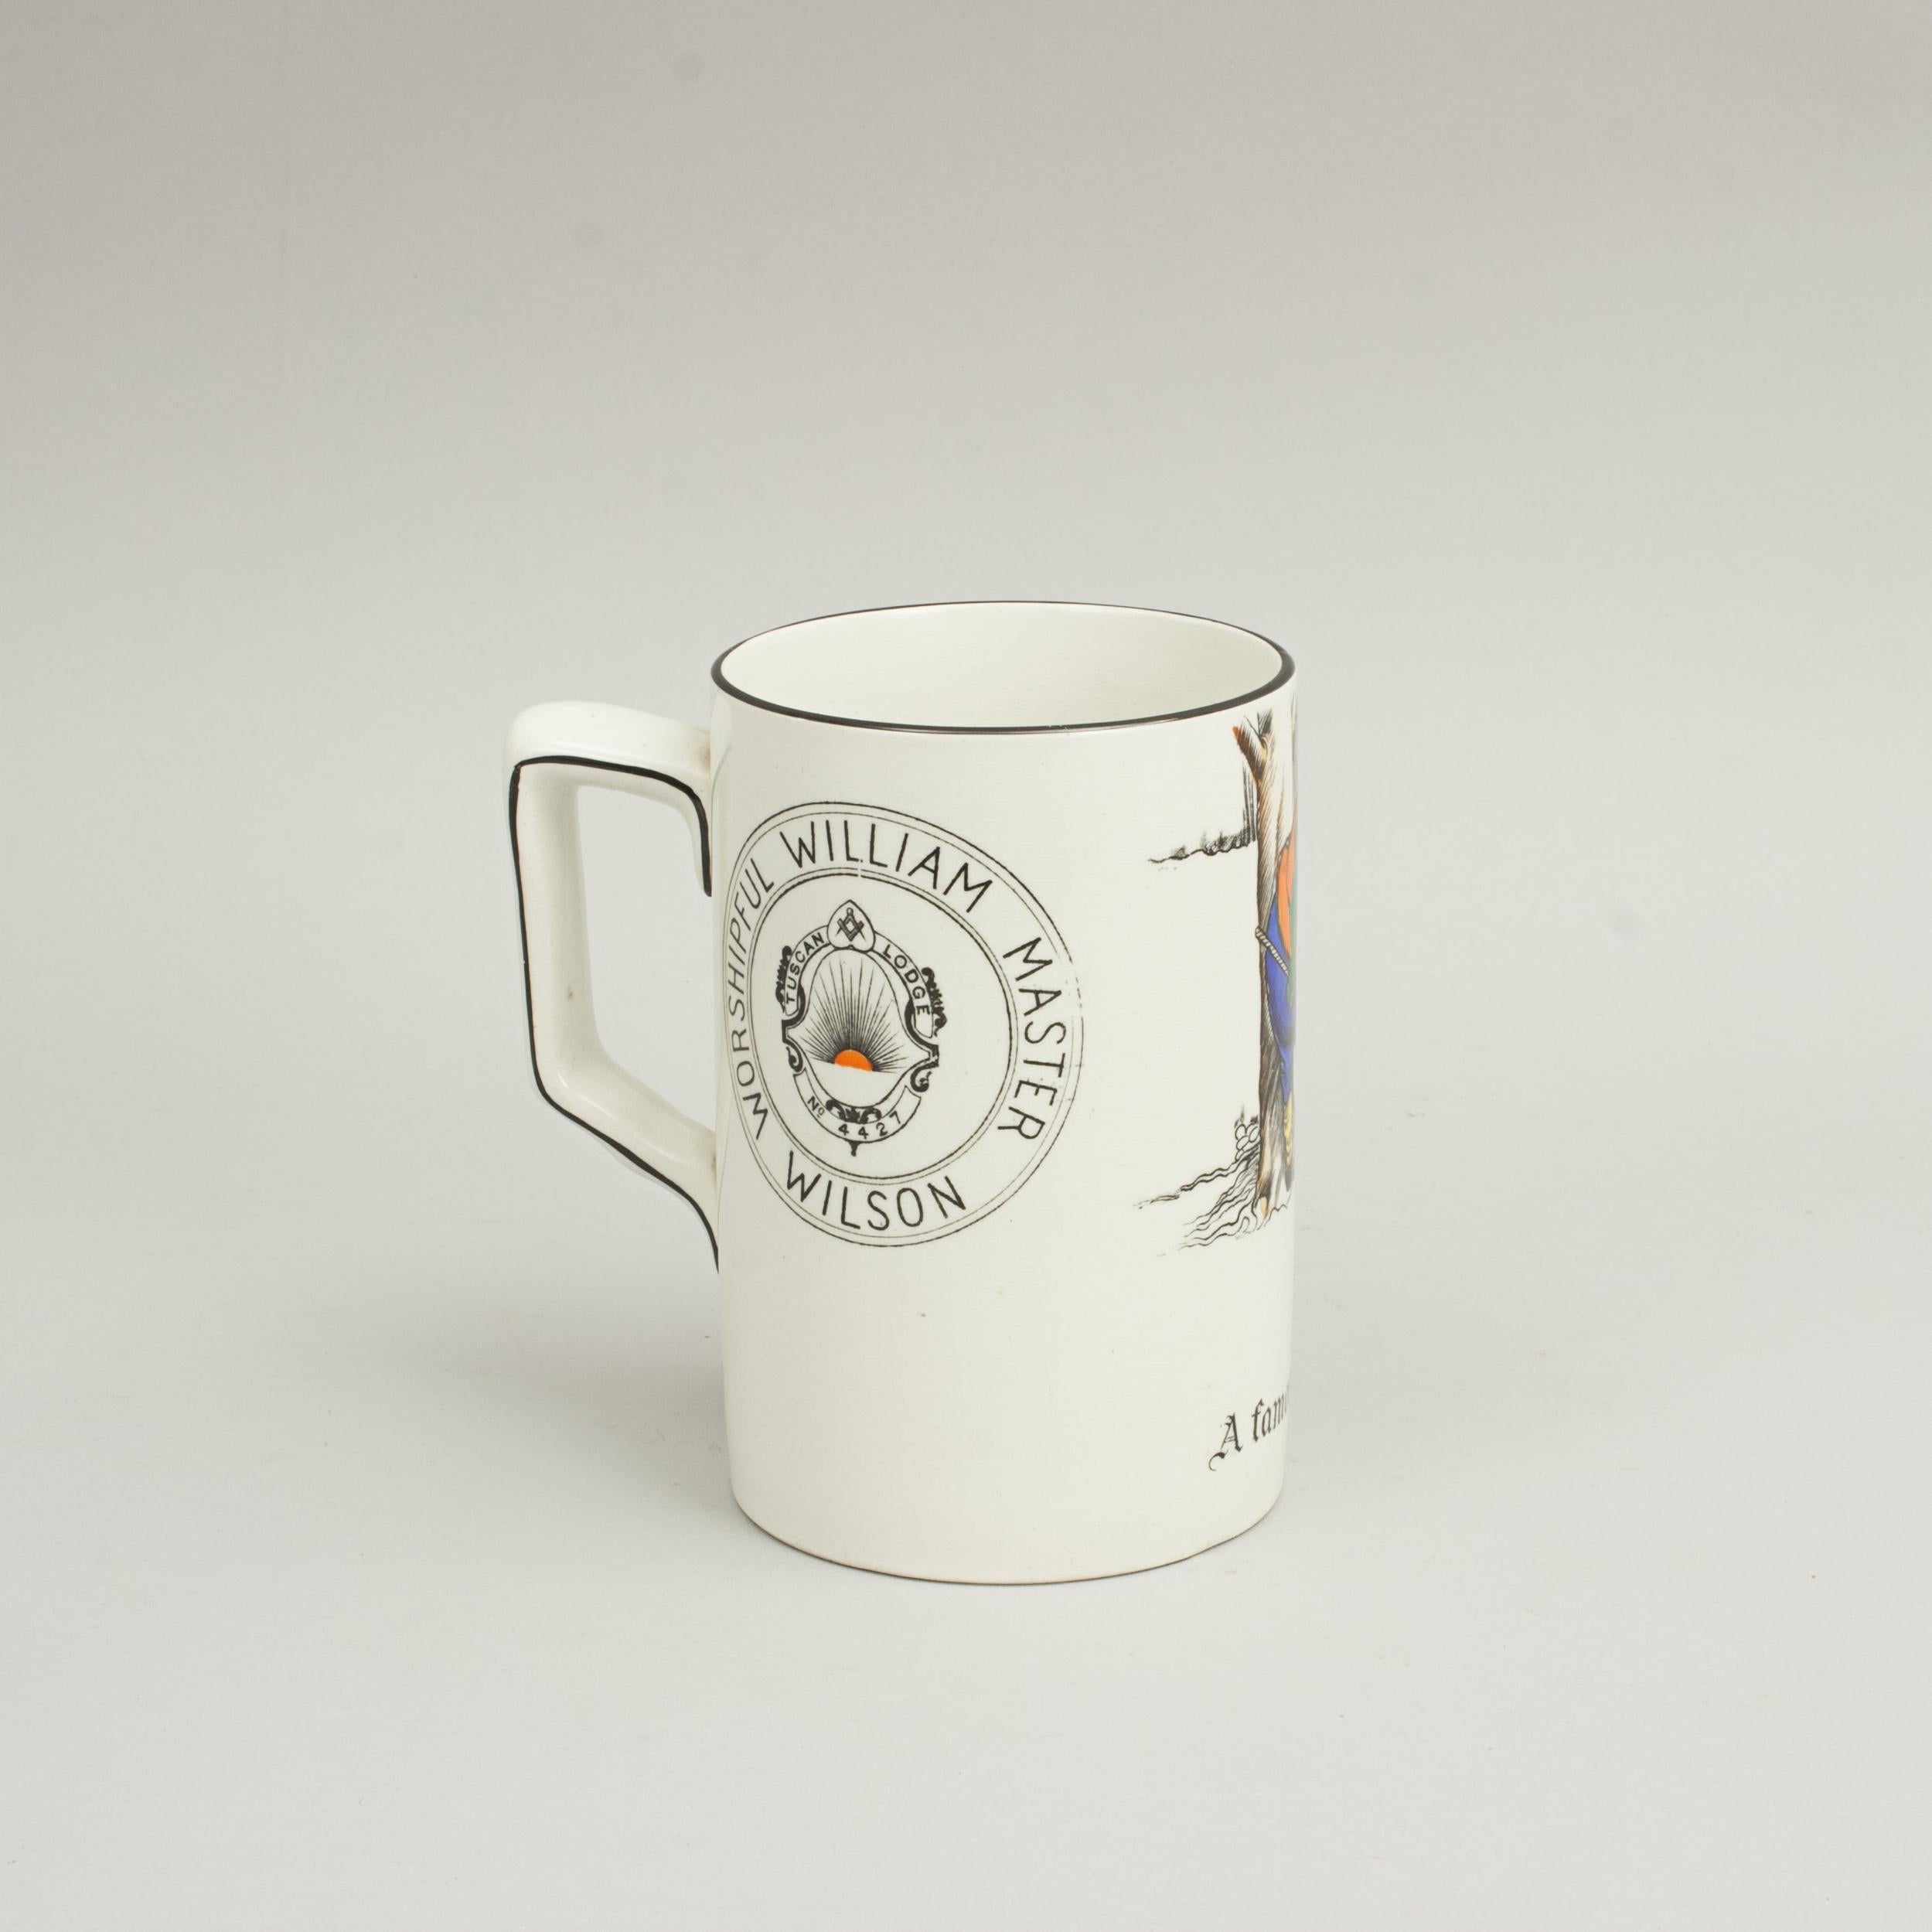 Masonic / Sportsman Golf Tankard.
A white glazed ceramic tankard with golf scene and Masonic emblem. The golf scene shows an inebriated golfer lent against a tree, his club strewn across the ground, talking to his golf ball. The slogan running